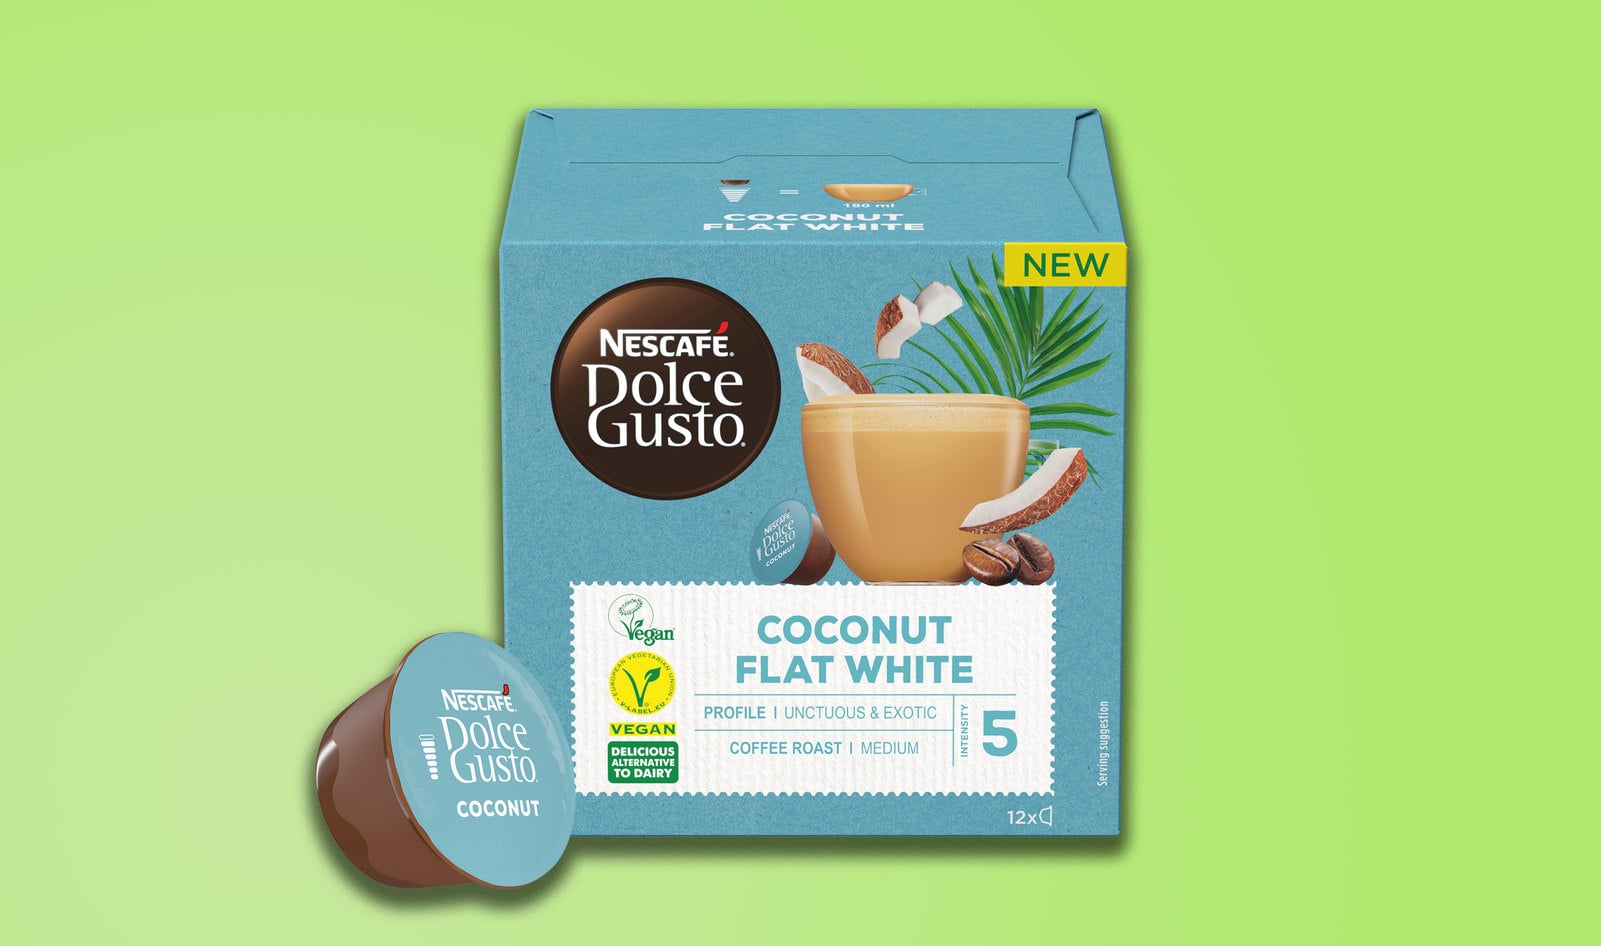 Nescafé Dolce Gusto launch Vegan Flat White coffee pods in the UK